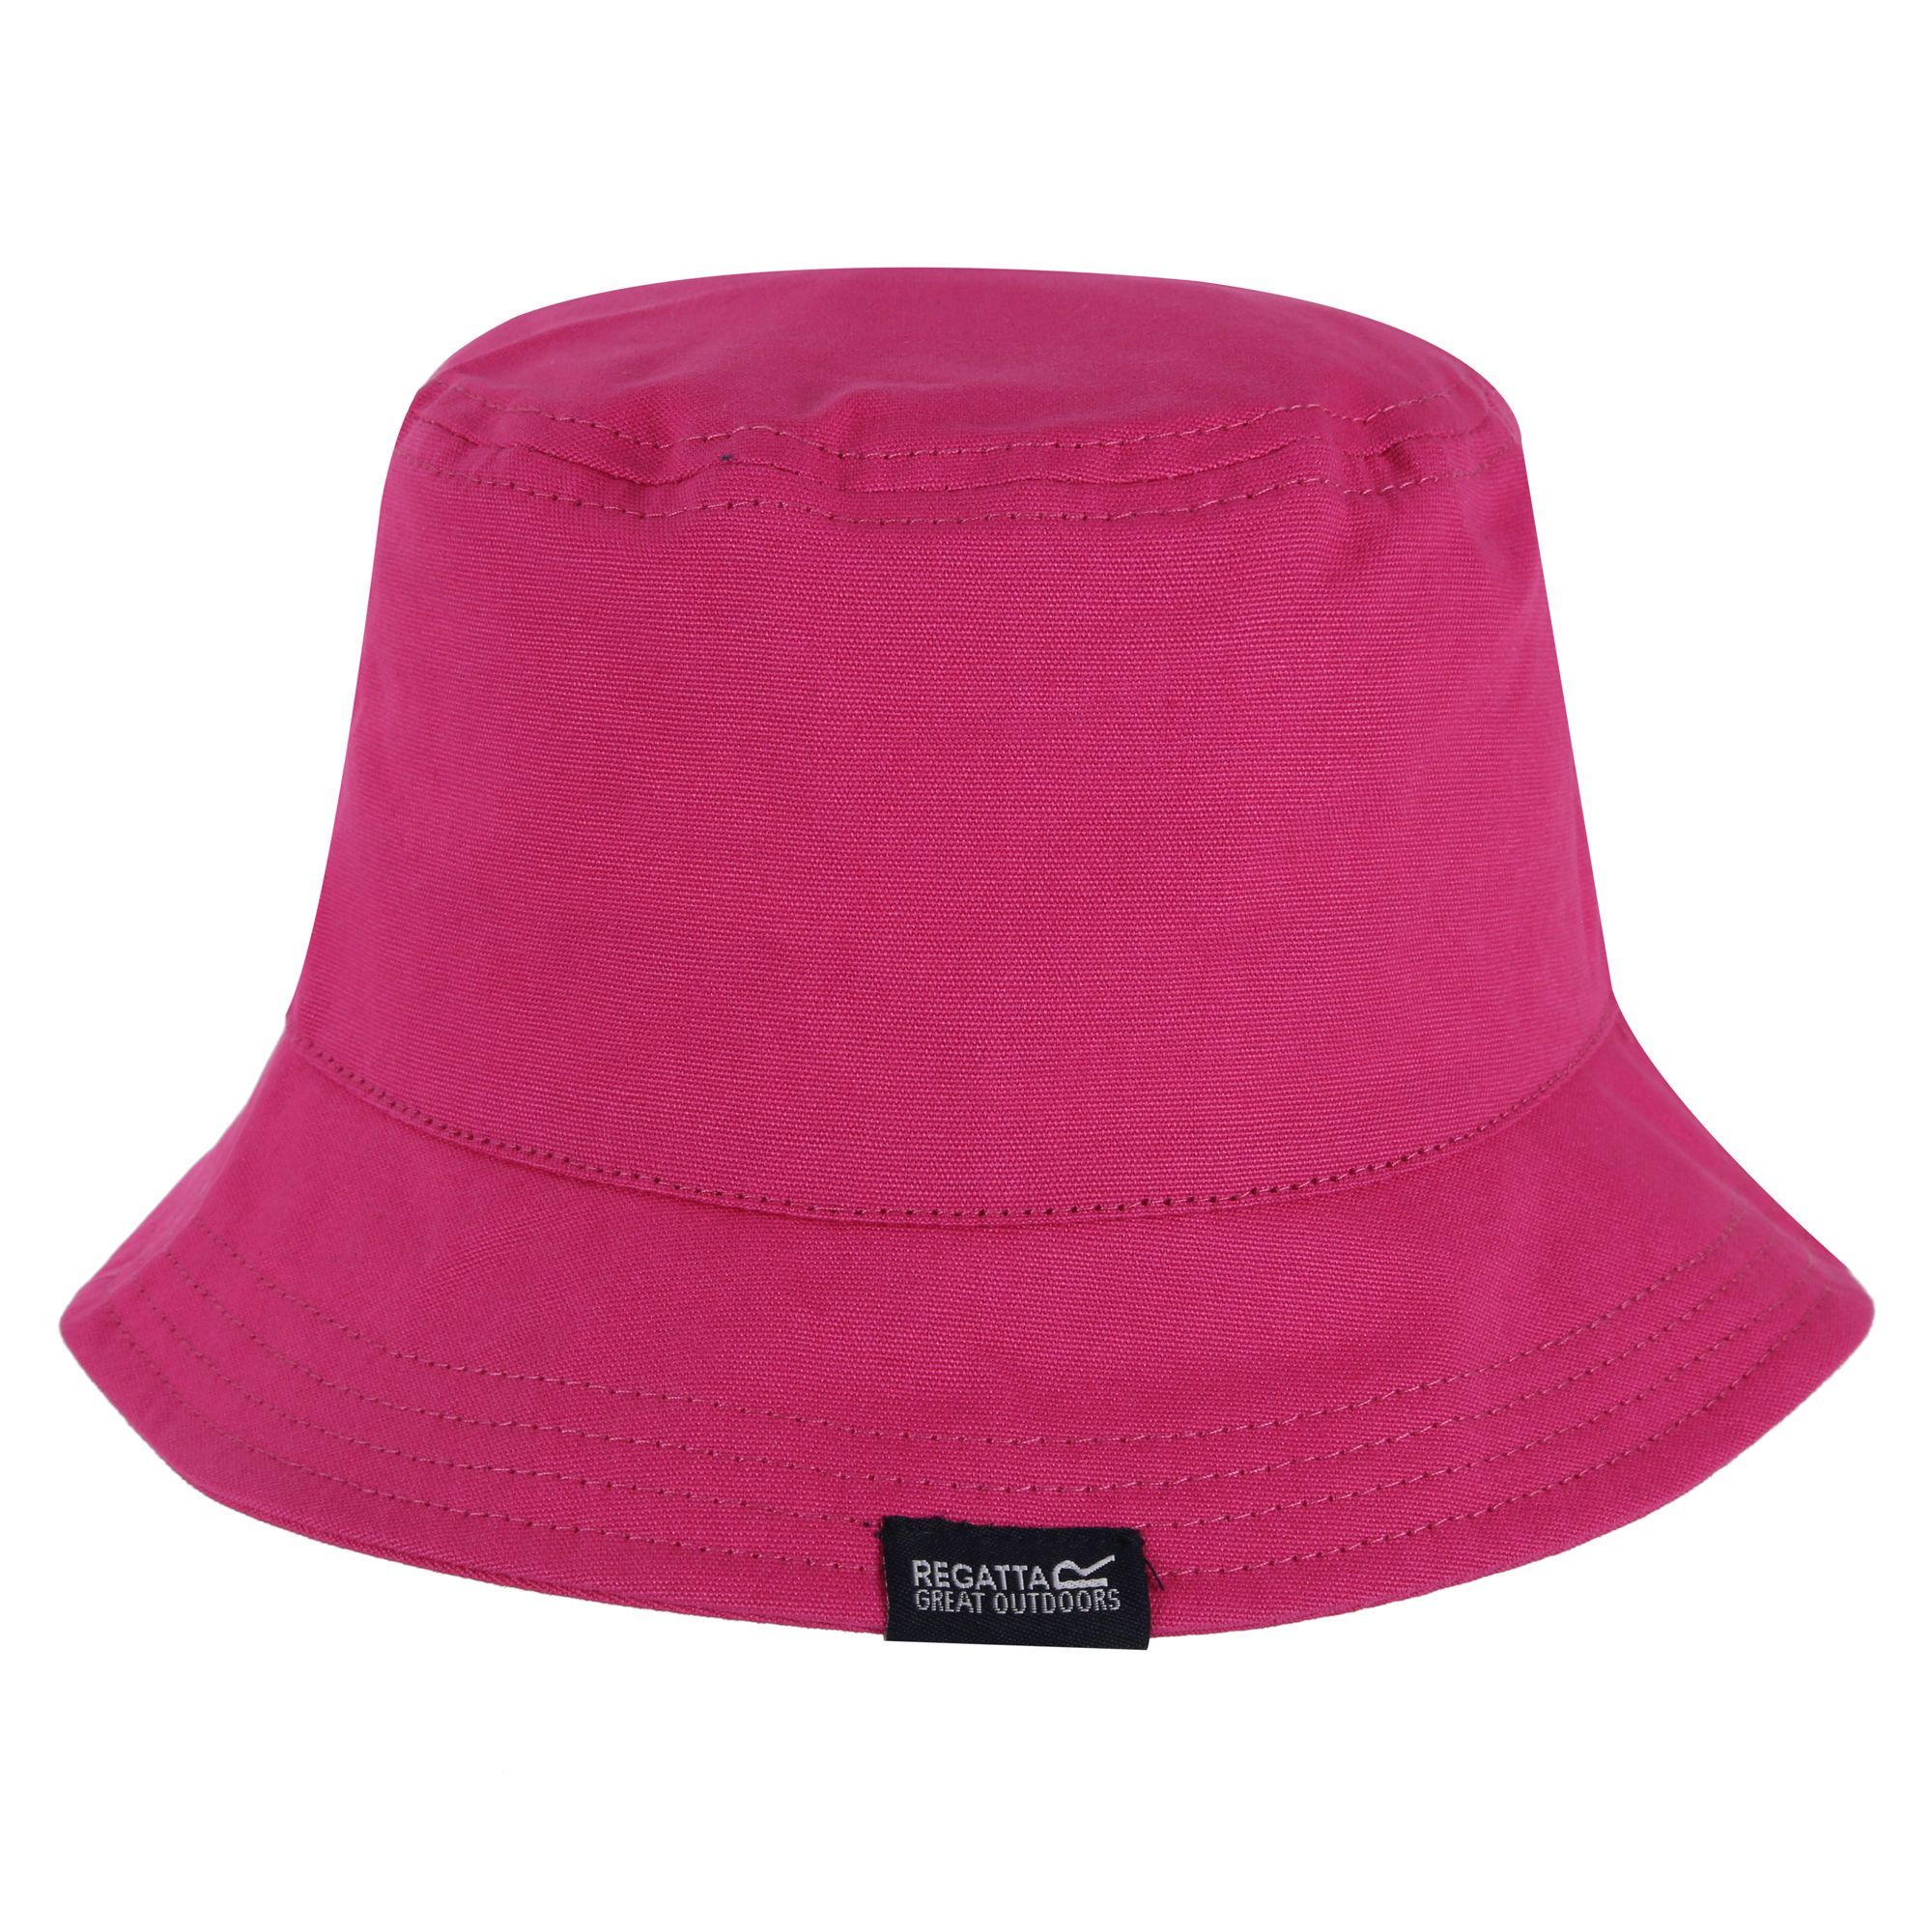 100% Cotton. Made from naturally breathable COOLWEAVE Cotton with a wide brim for extra sun protection.